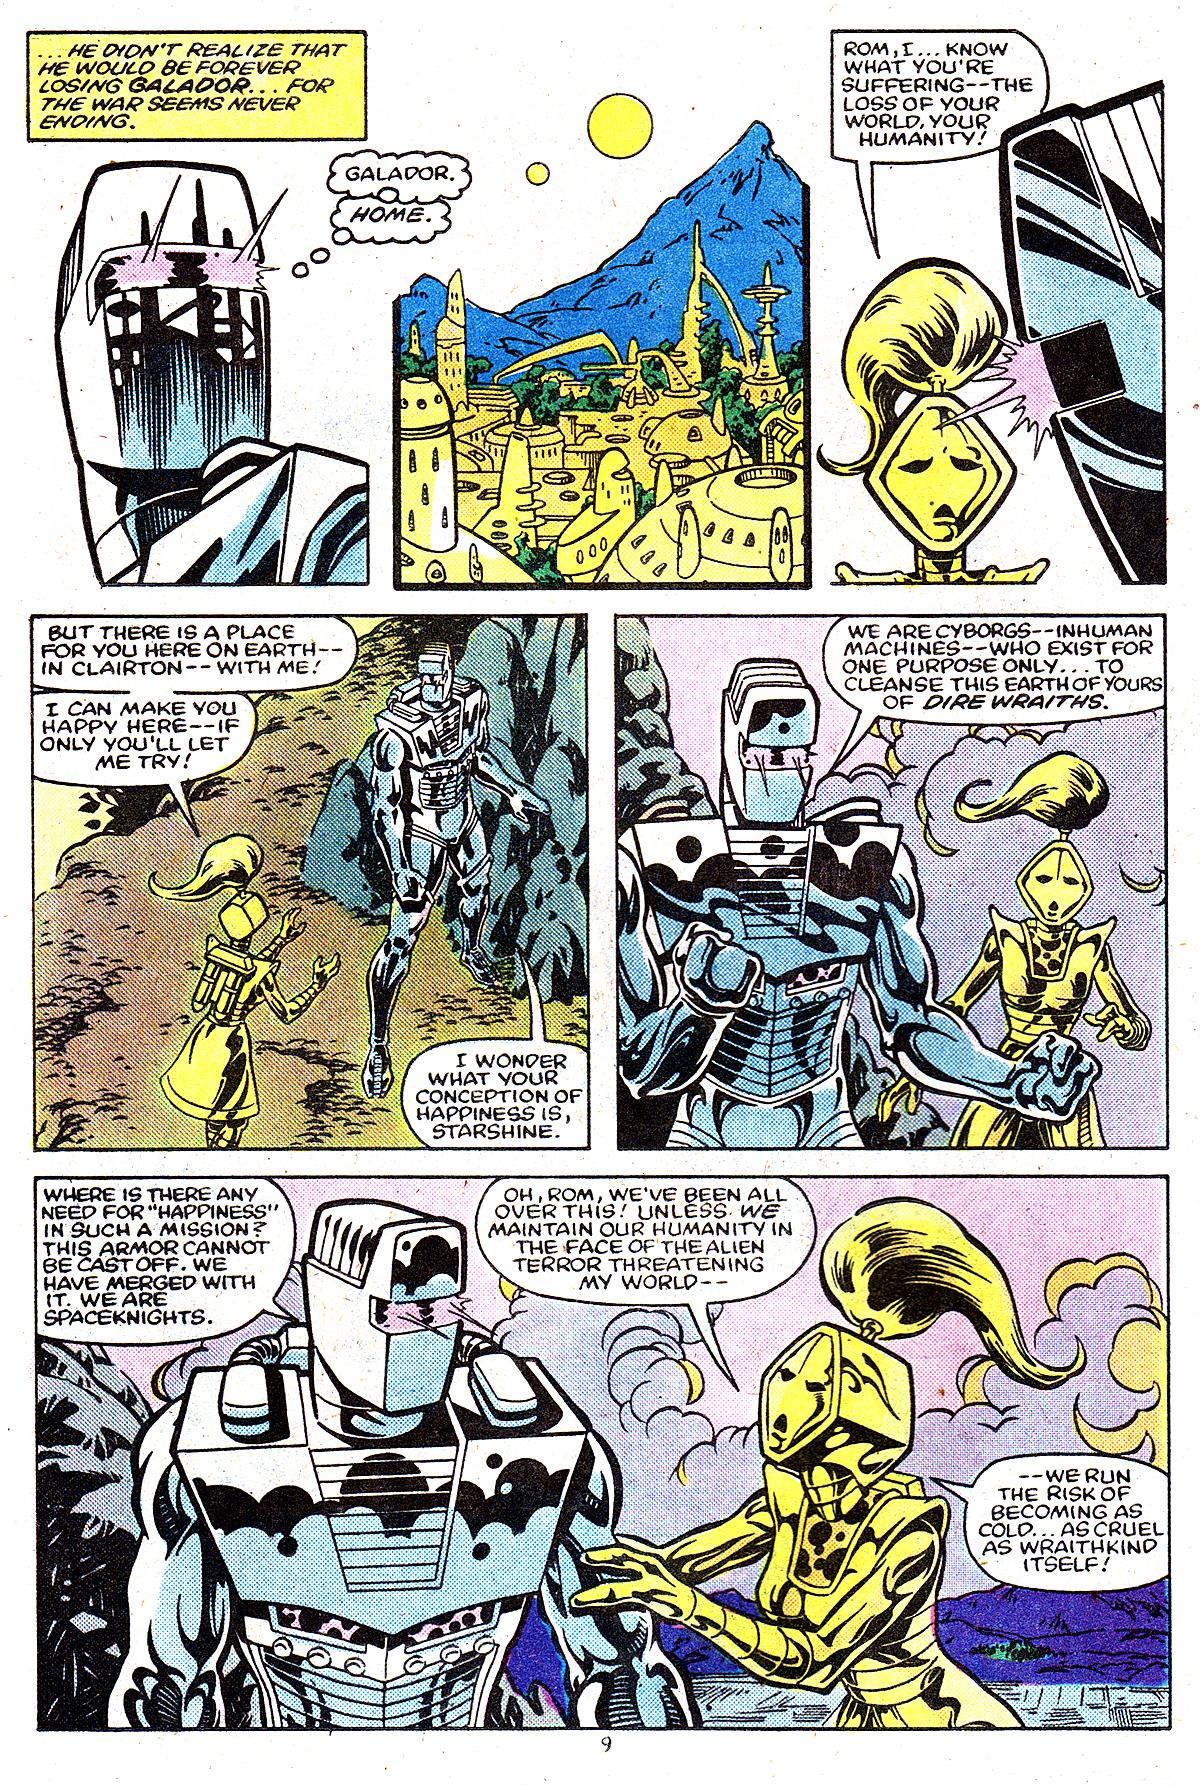 Read online ROM (1979) comic -  Issue #49 - 9